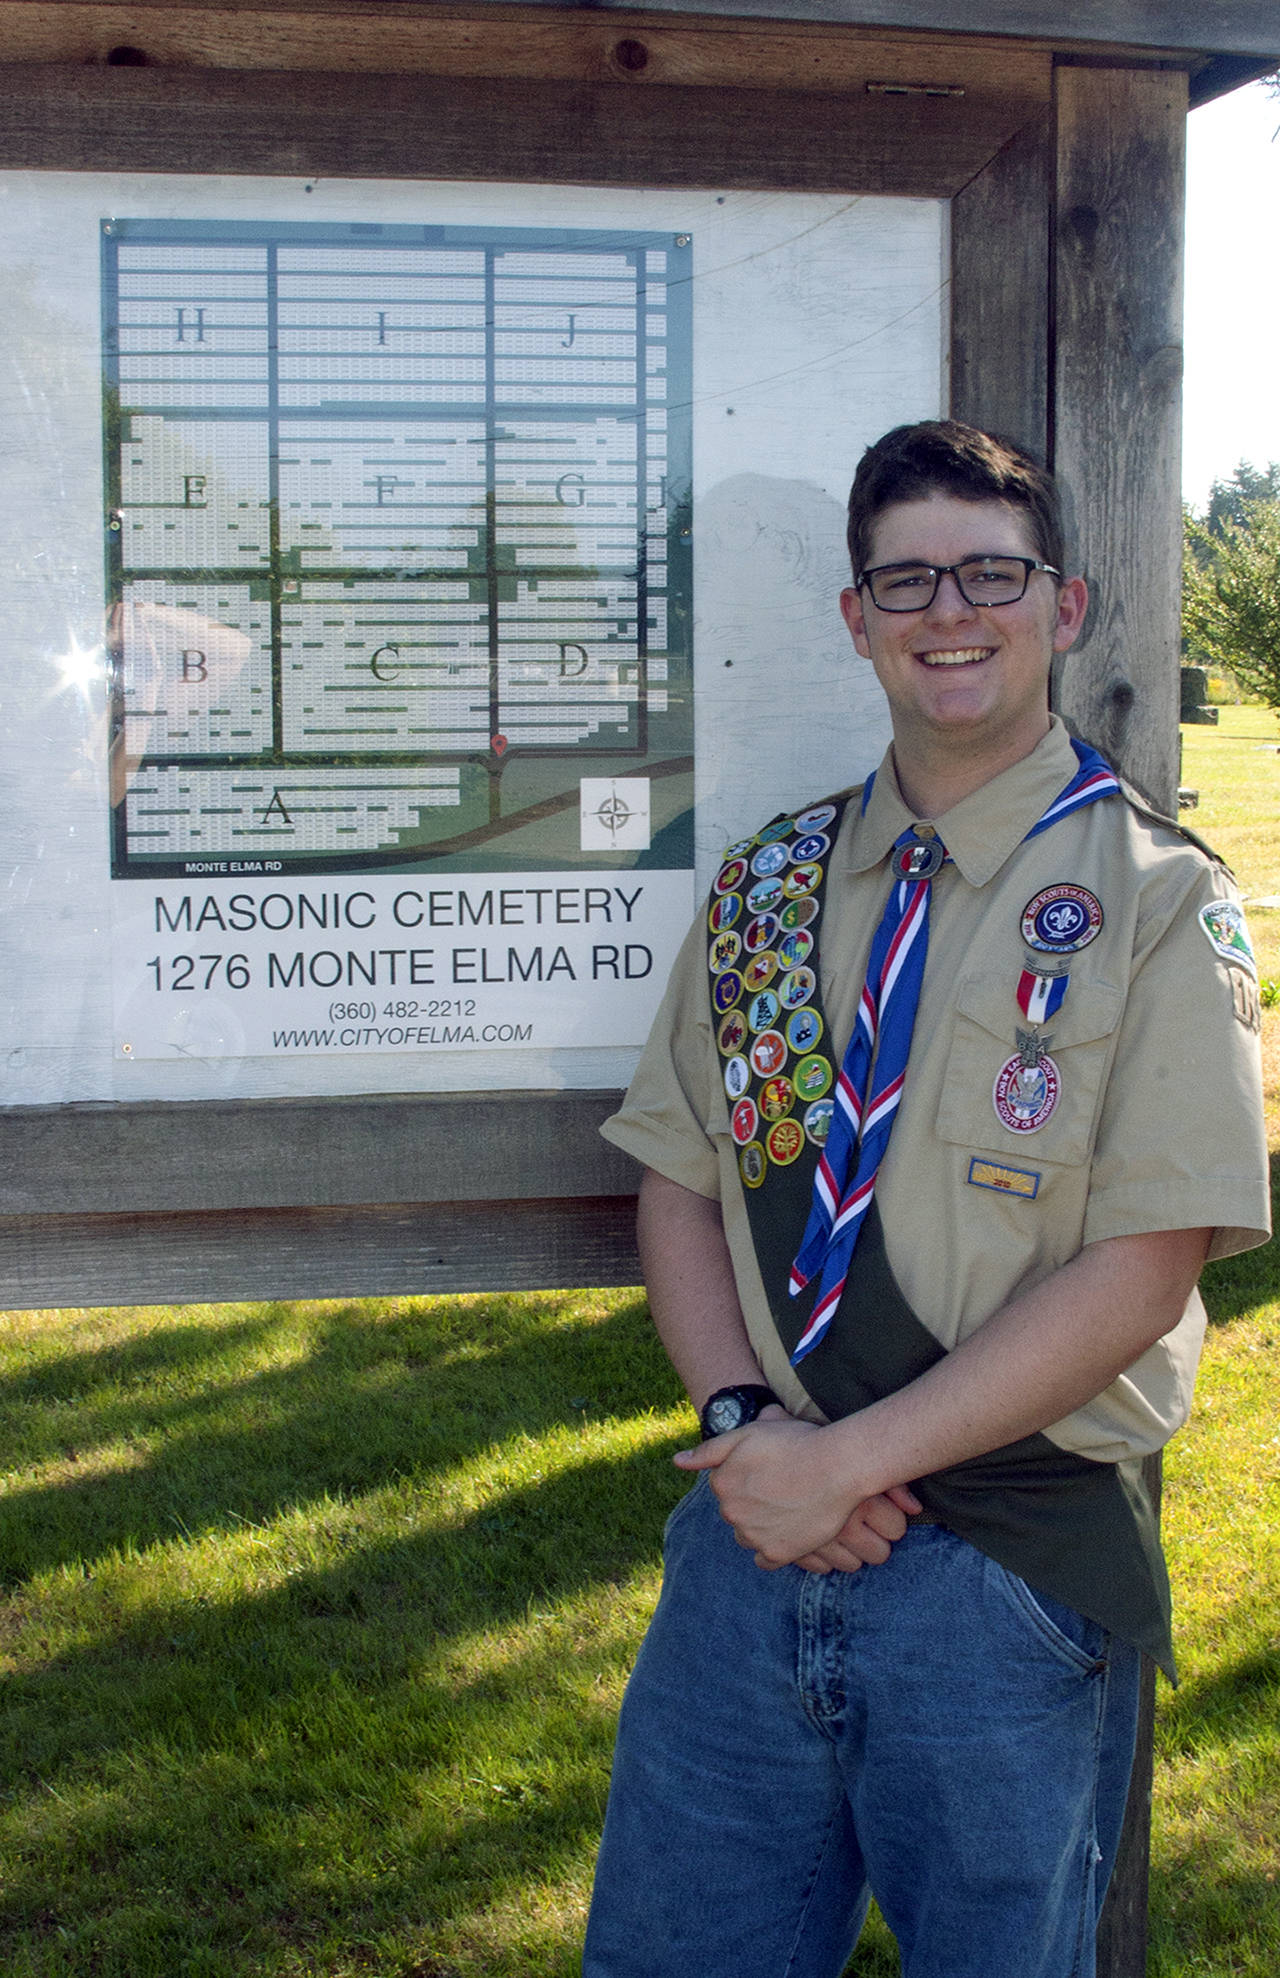 (Photo courtesy Werner family) Andrew Werner oversaw an extensive research project to map the Masonic Cemetery in Elma, with emphasis on identifying veterans’ burial places.